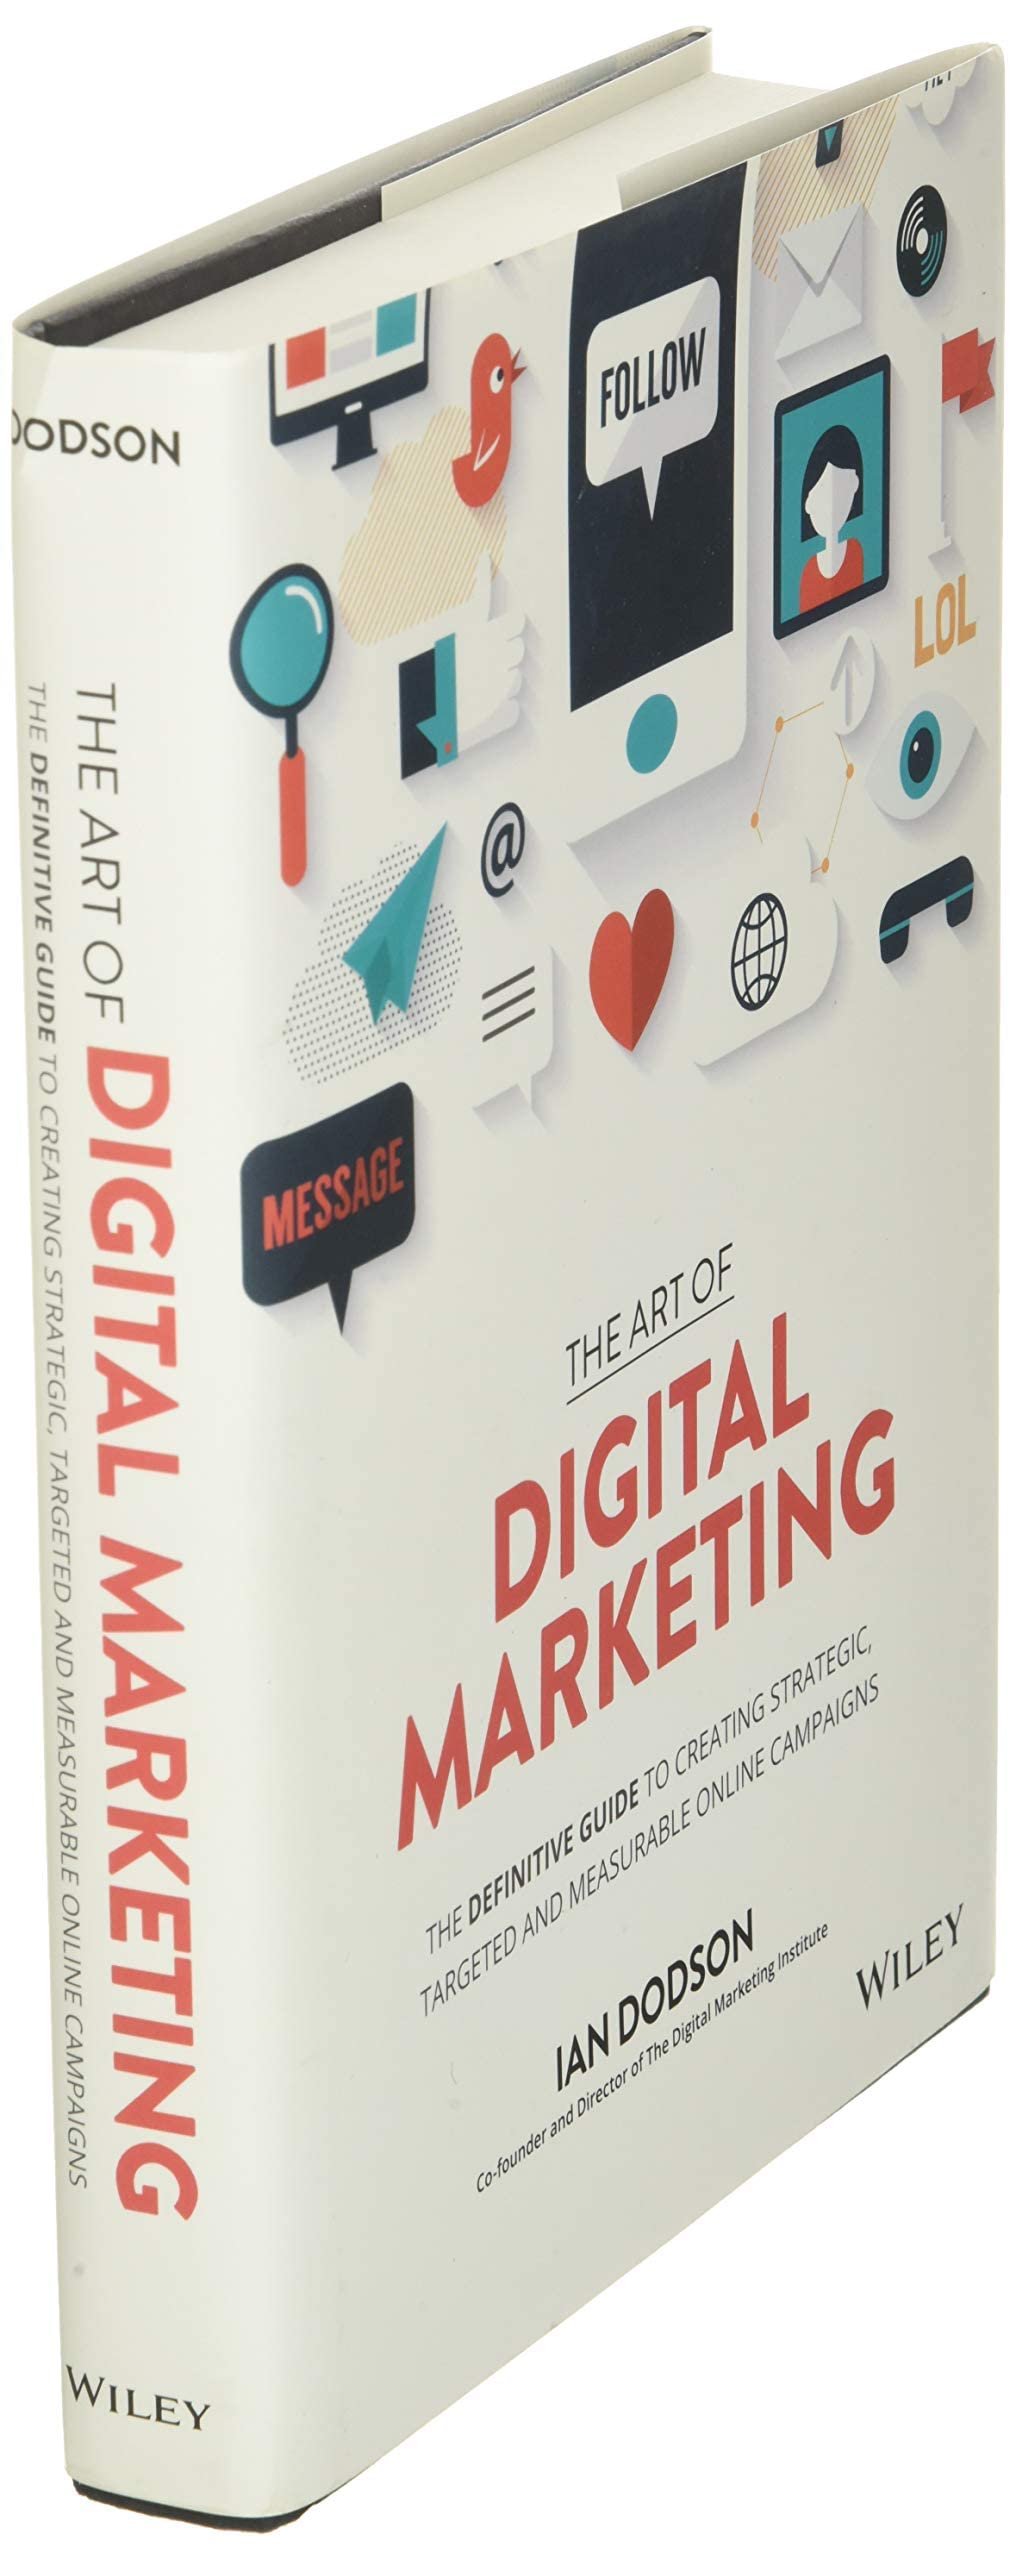 The Art of Digital Marketing: The Definitive Guide to Creating Strategic, Targeted, and Measurable Online Campaigns